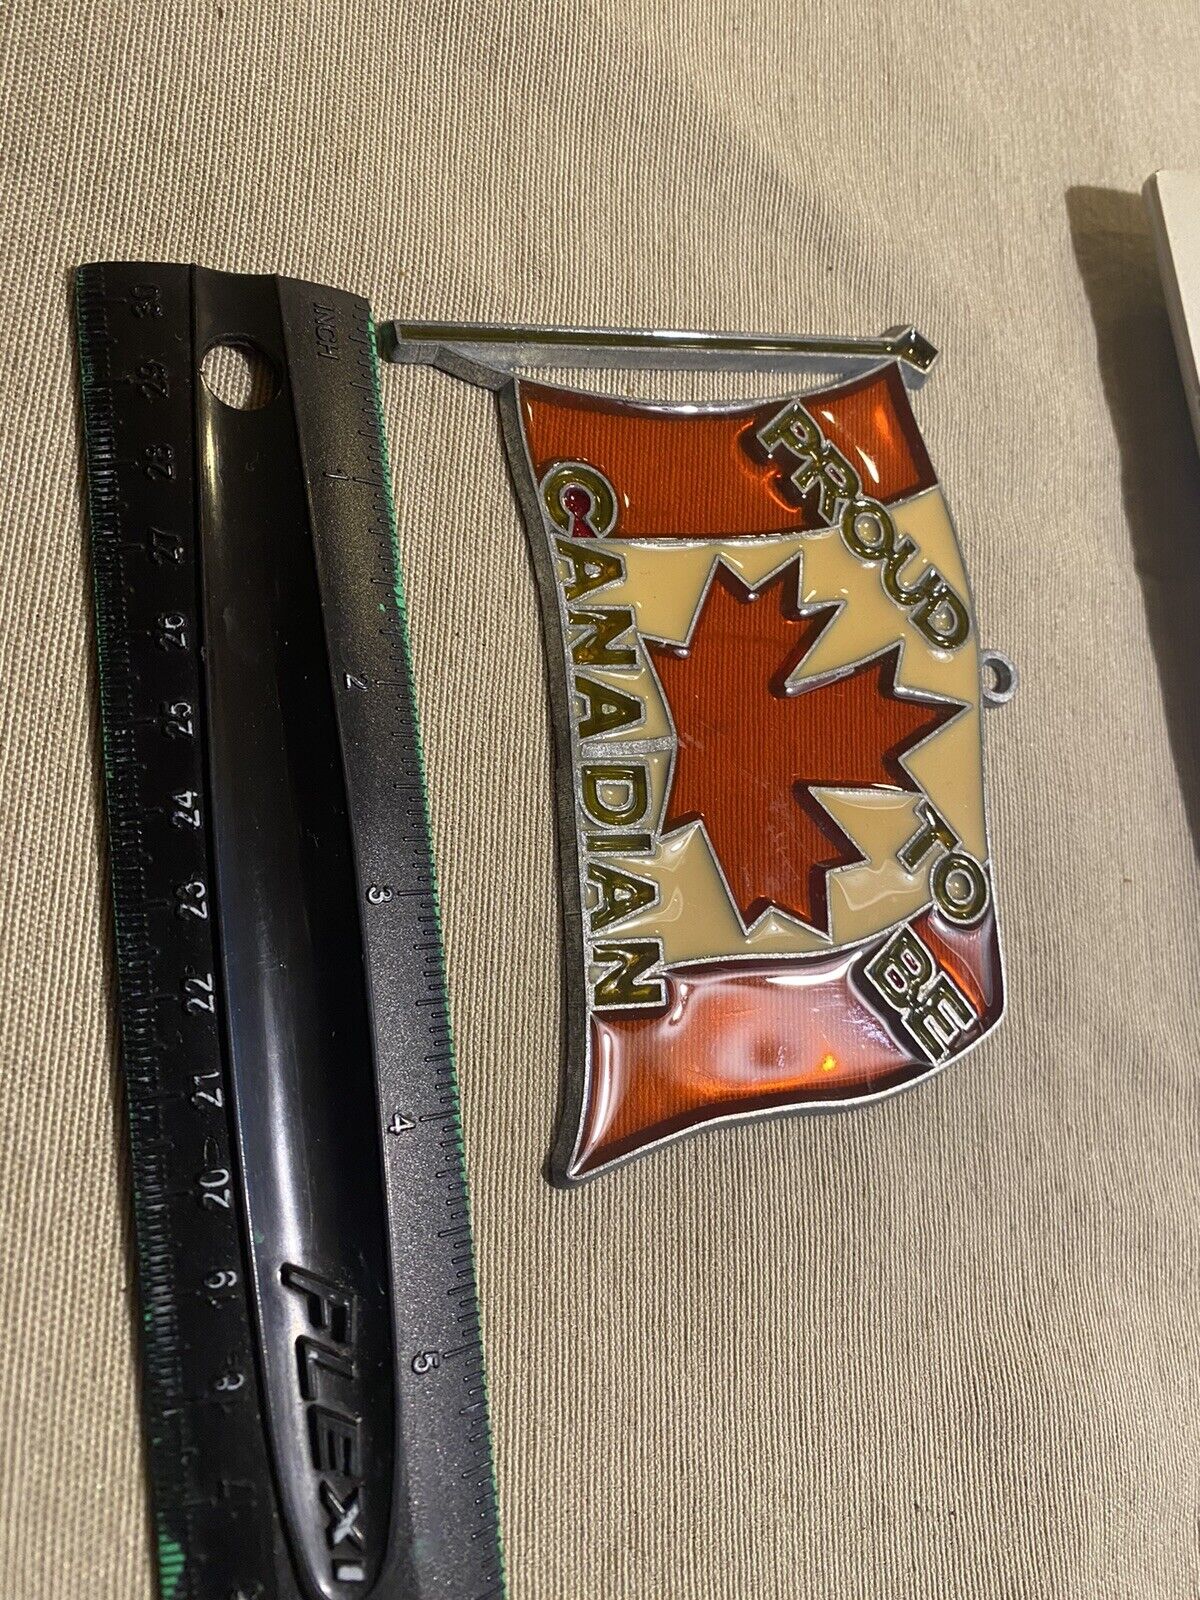 HANGING CHRISTMAS ORNAMENT STAIN GLASS SUN CATCHER -PROUD TO BE CANADIAN CANADA Без бренда - фотография #2